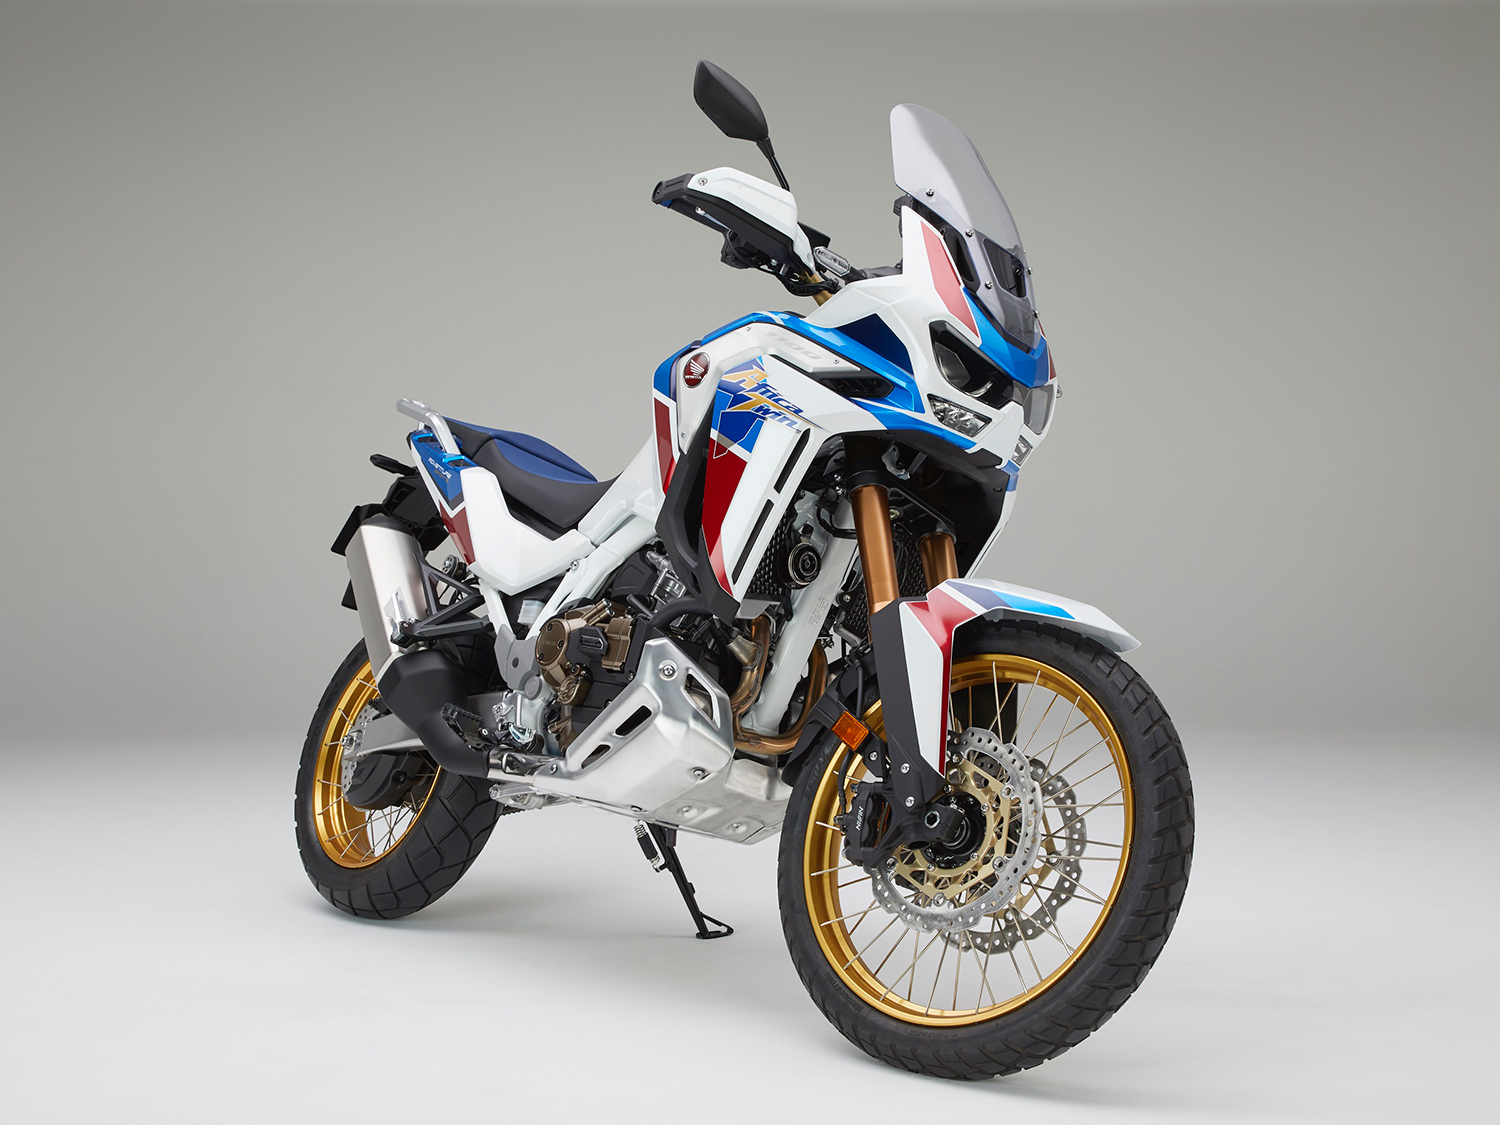 2020 CRF1100L Honda Africa Twin First Look